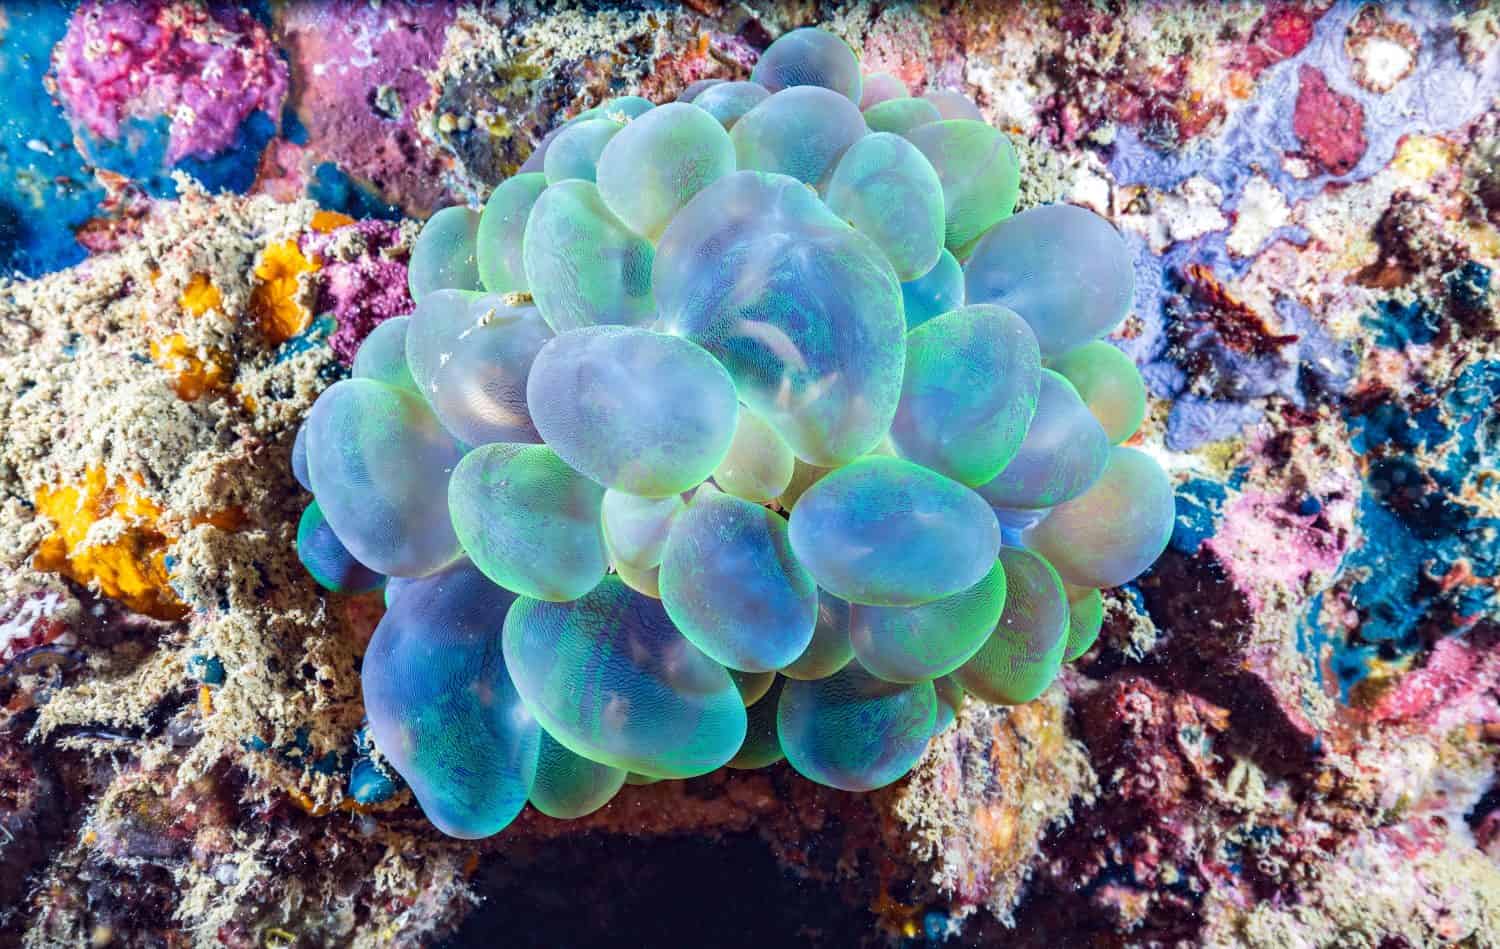 Plerogyra sinuosa is a jelly-like species of the phylum Cnidaria. It is commonly called "bubble coral" due to its bubbly appearance. on the coral reef of Phi Phi Islands, Thailand